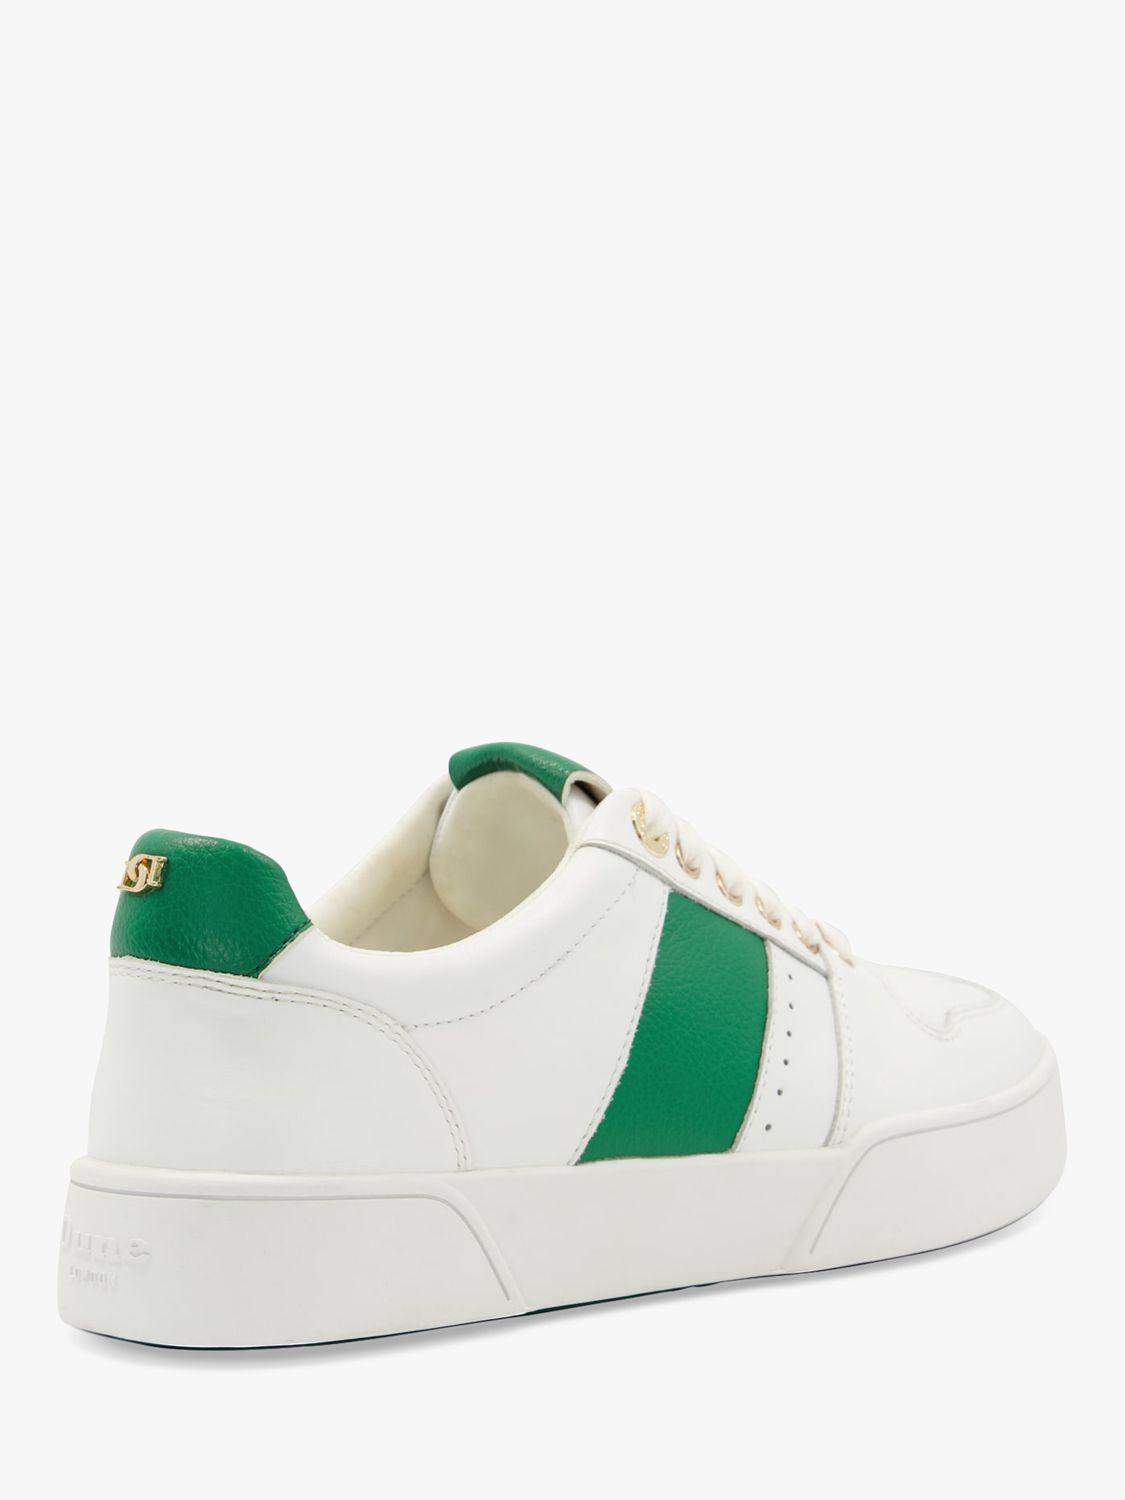 Dune Elysium Leather Side Stripe Trainers, Green at John Lewis & Partners